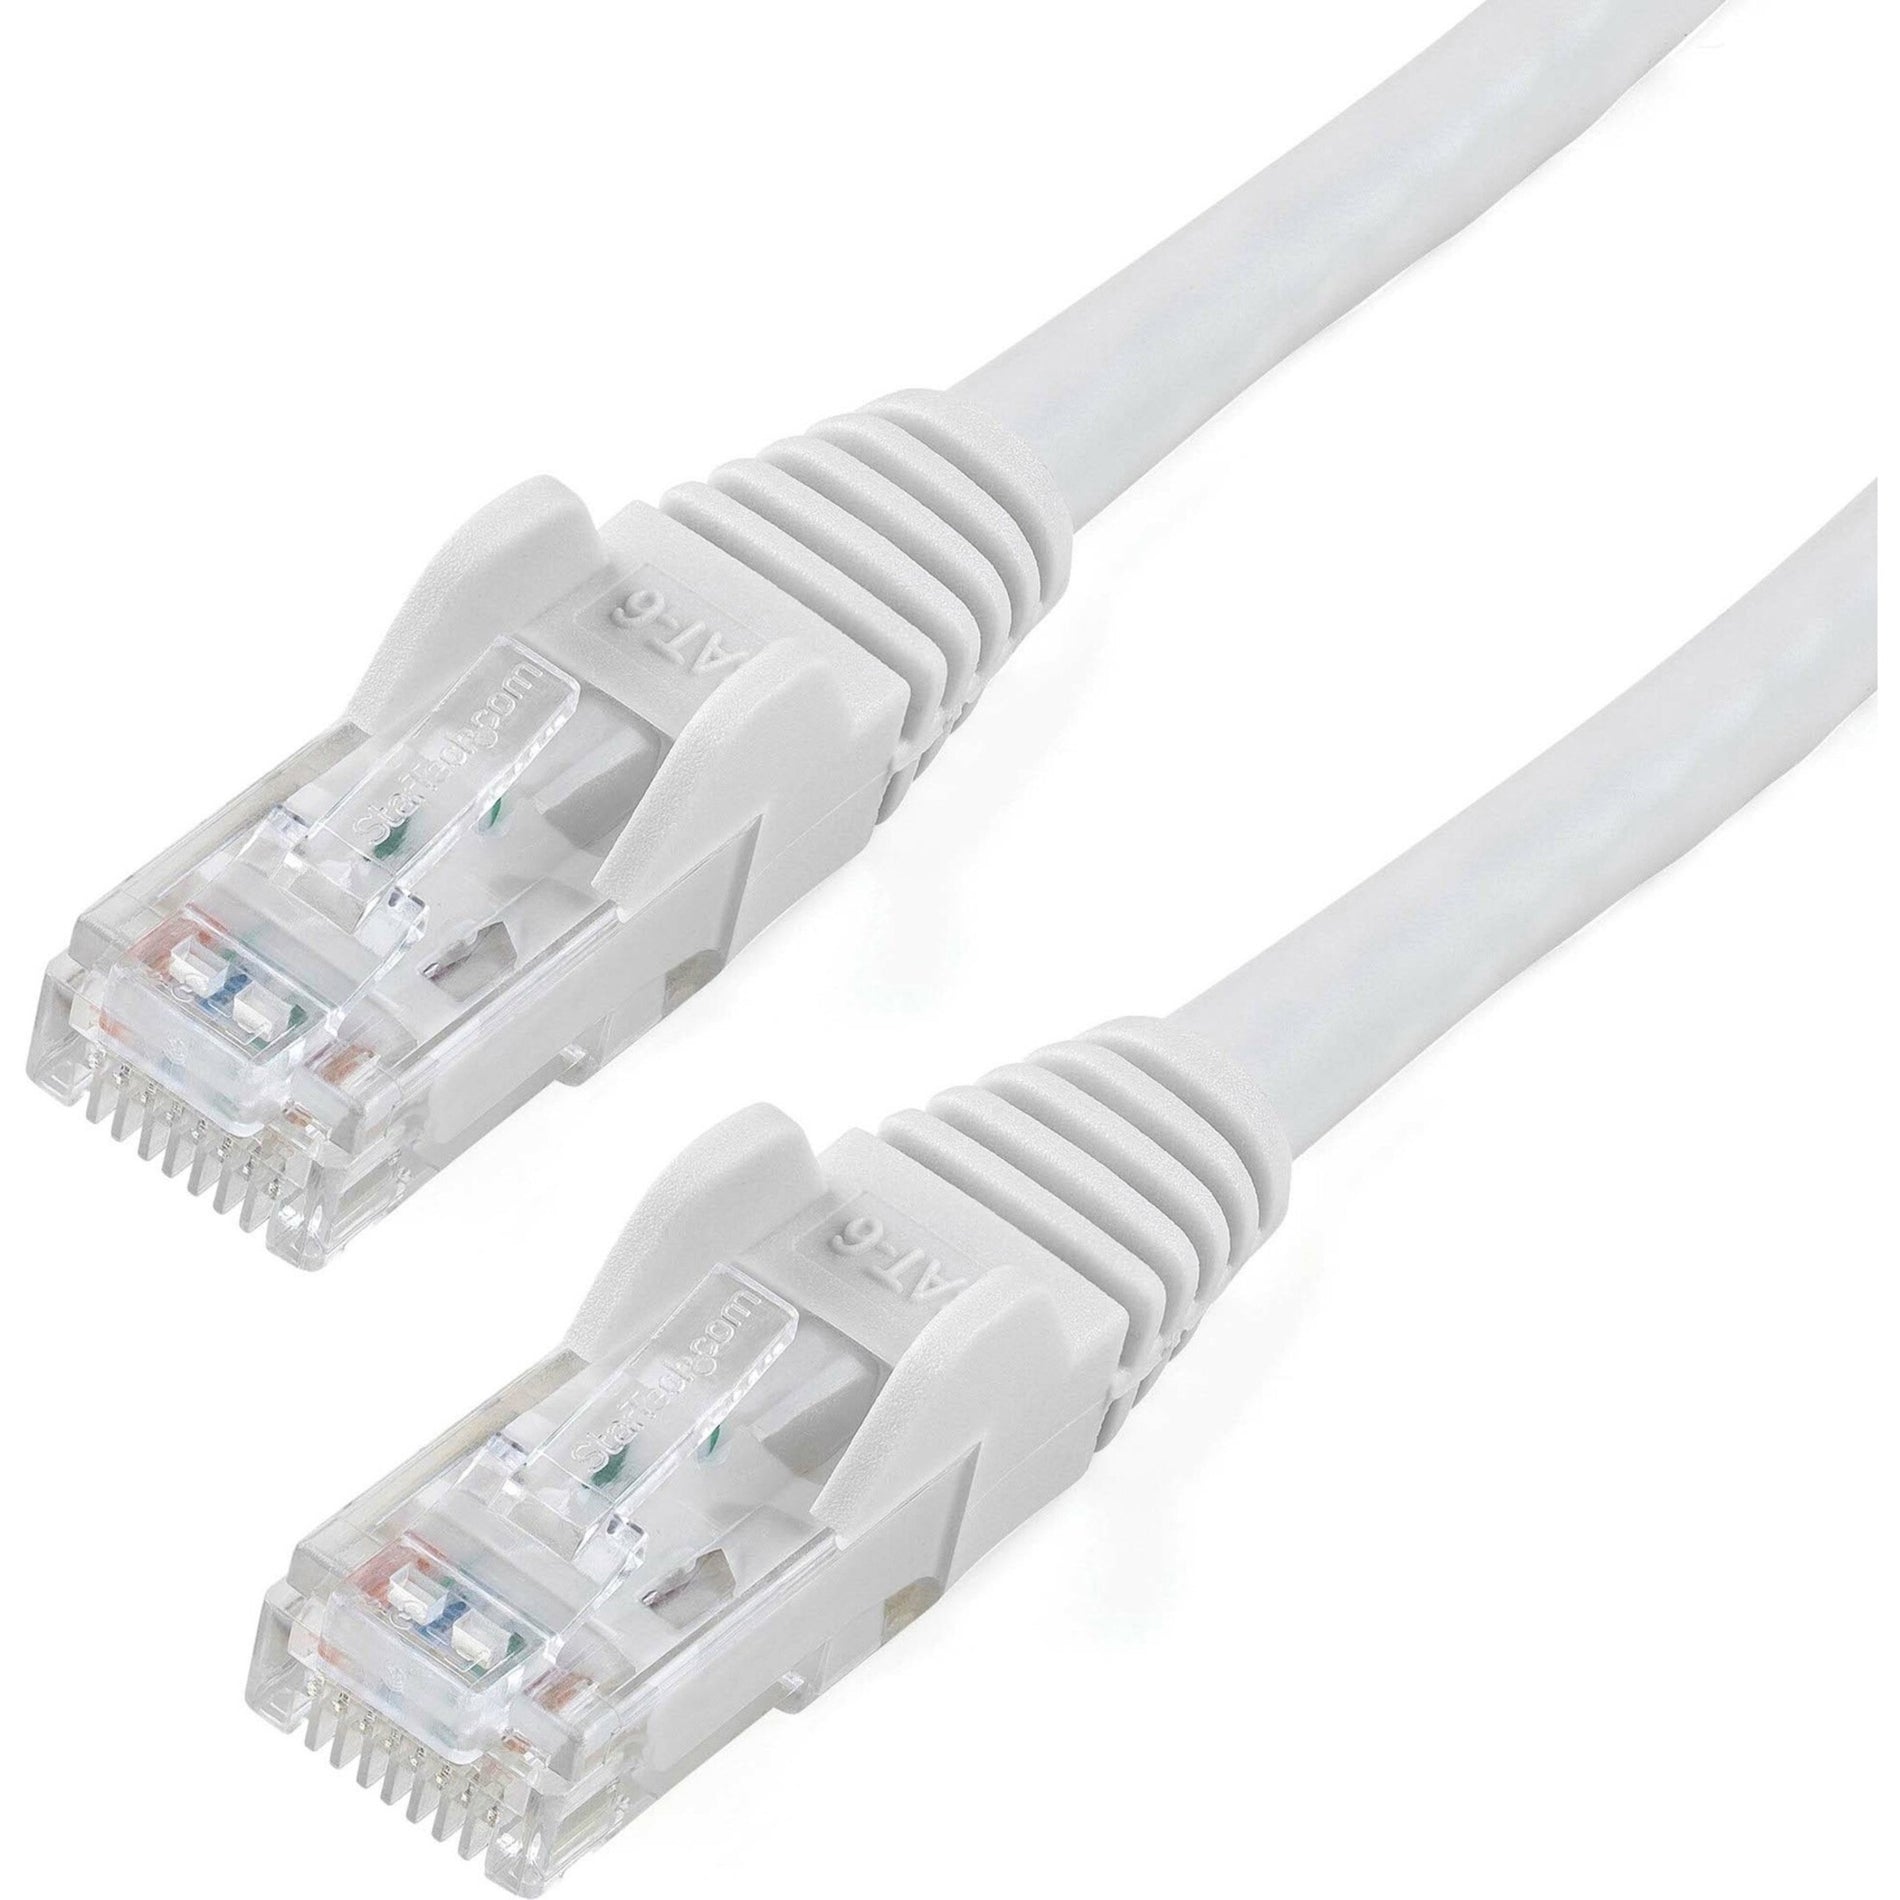 StarTech.com N6PATCH1WH Cat.6 Patch Network Cable, 1ft White Ethernet Cable, Snagless RJ45 Connectors